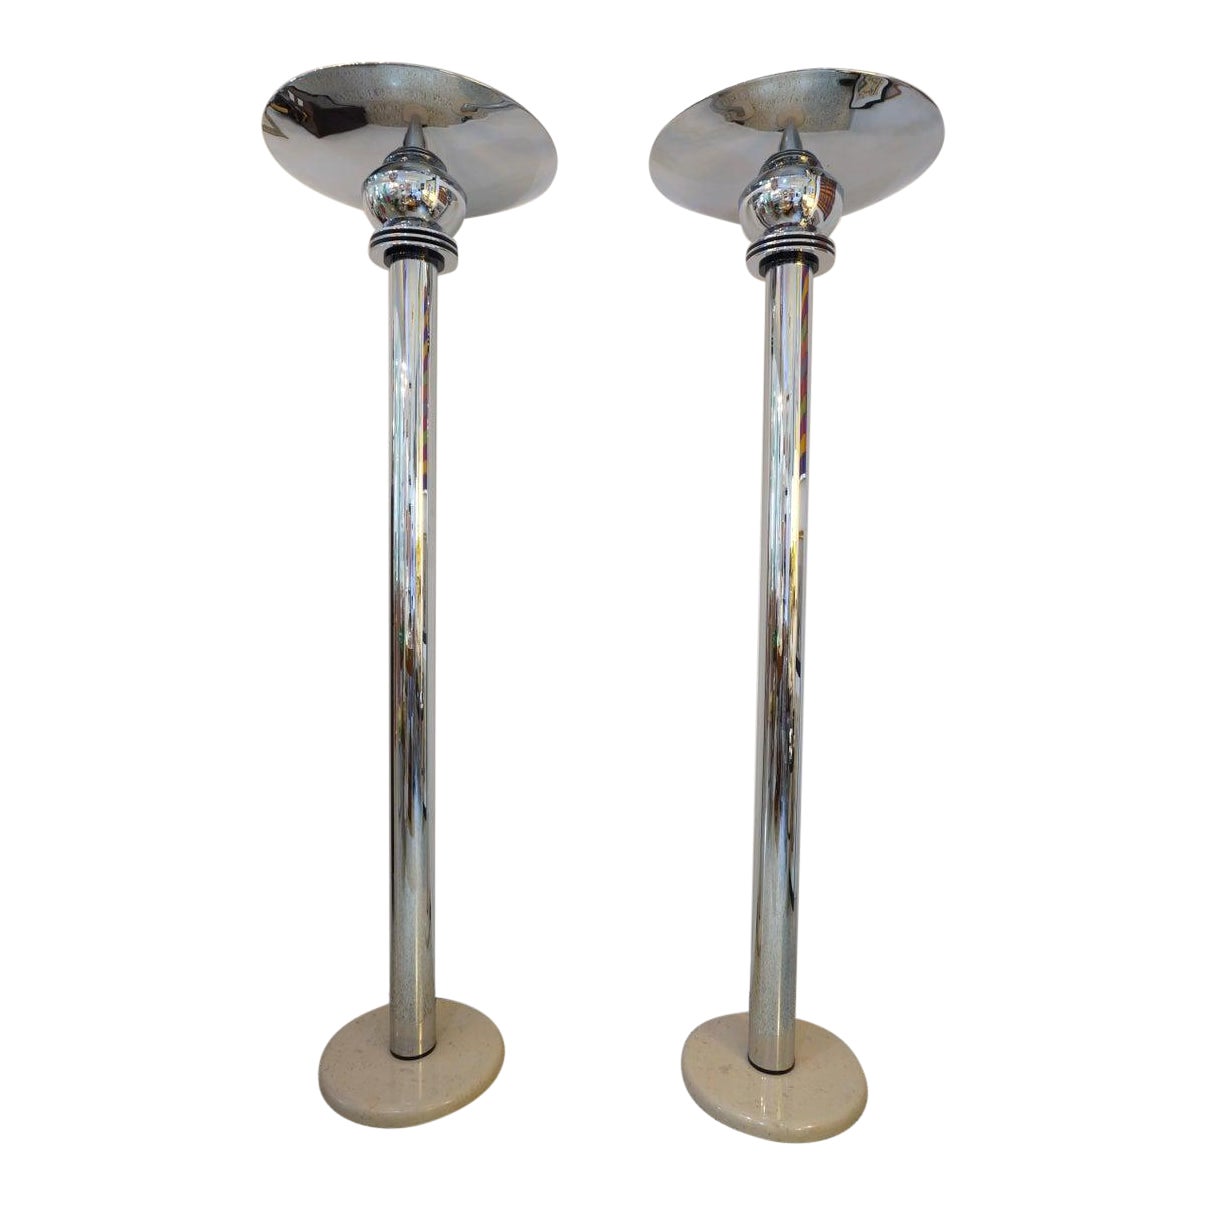 Pair of Art Deco Style Chrome Torcheres by Jay Spectre